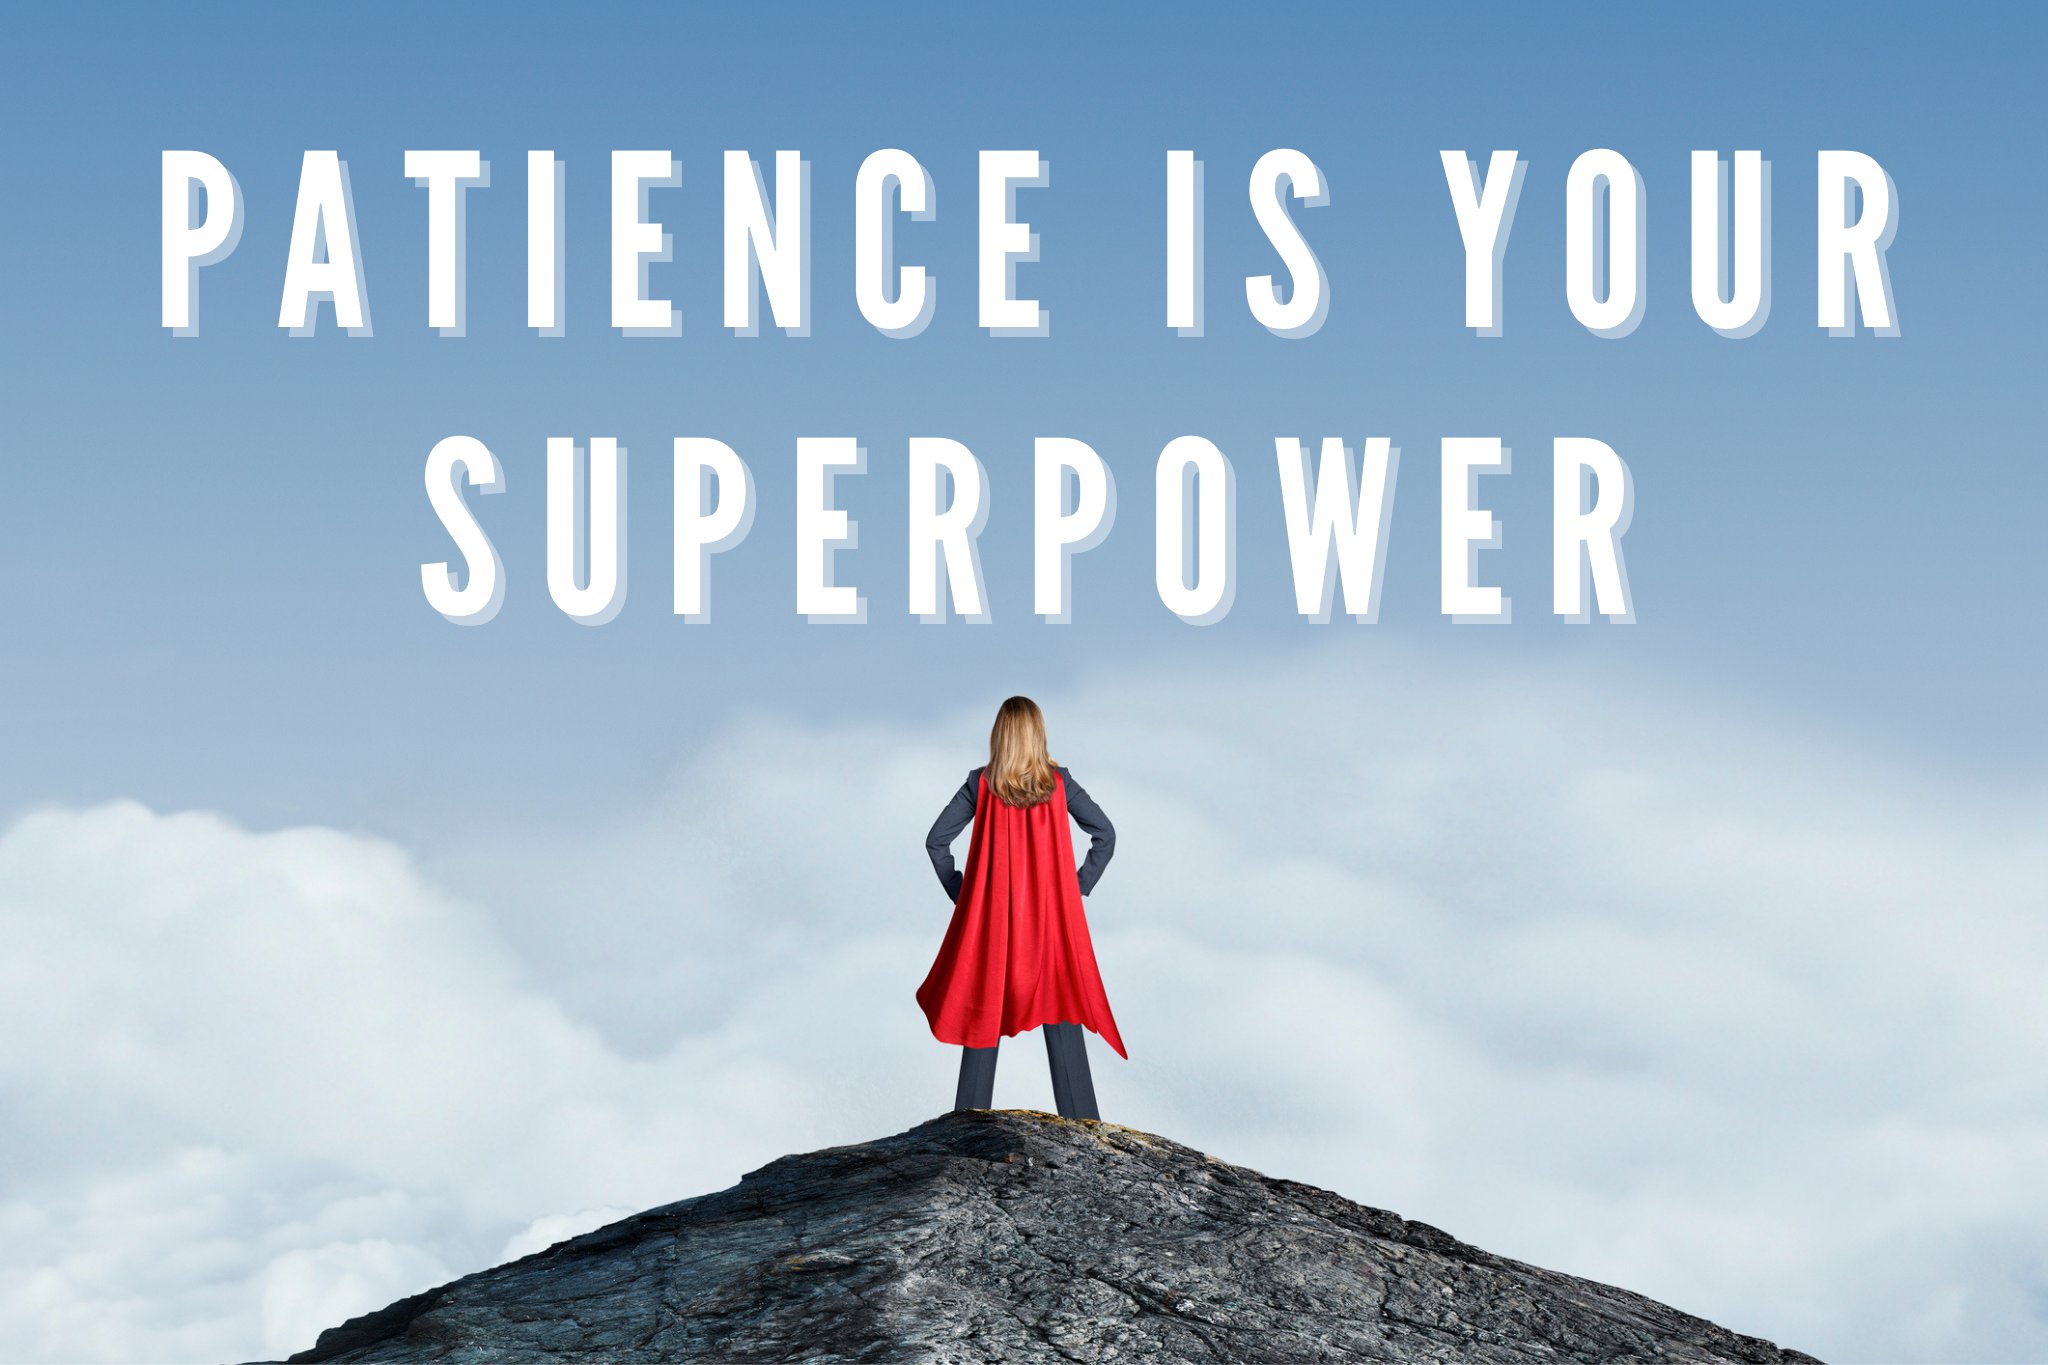 https://theapna.org/wp-content/uploads/2022/05/Patience-is-your-Superpower-1.png